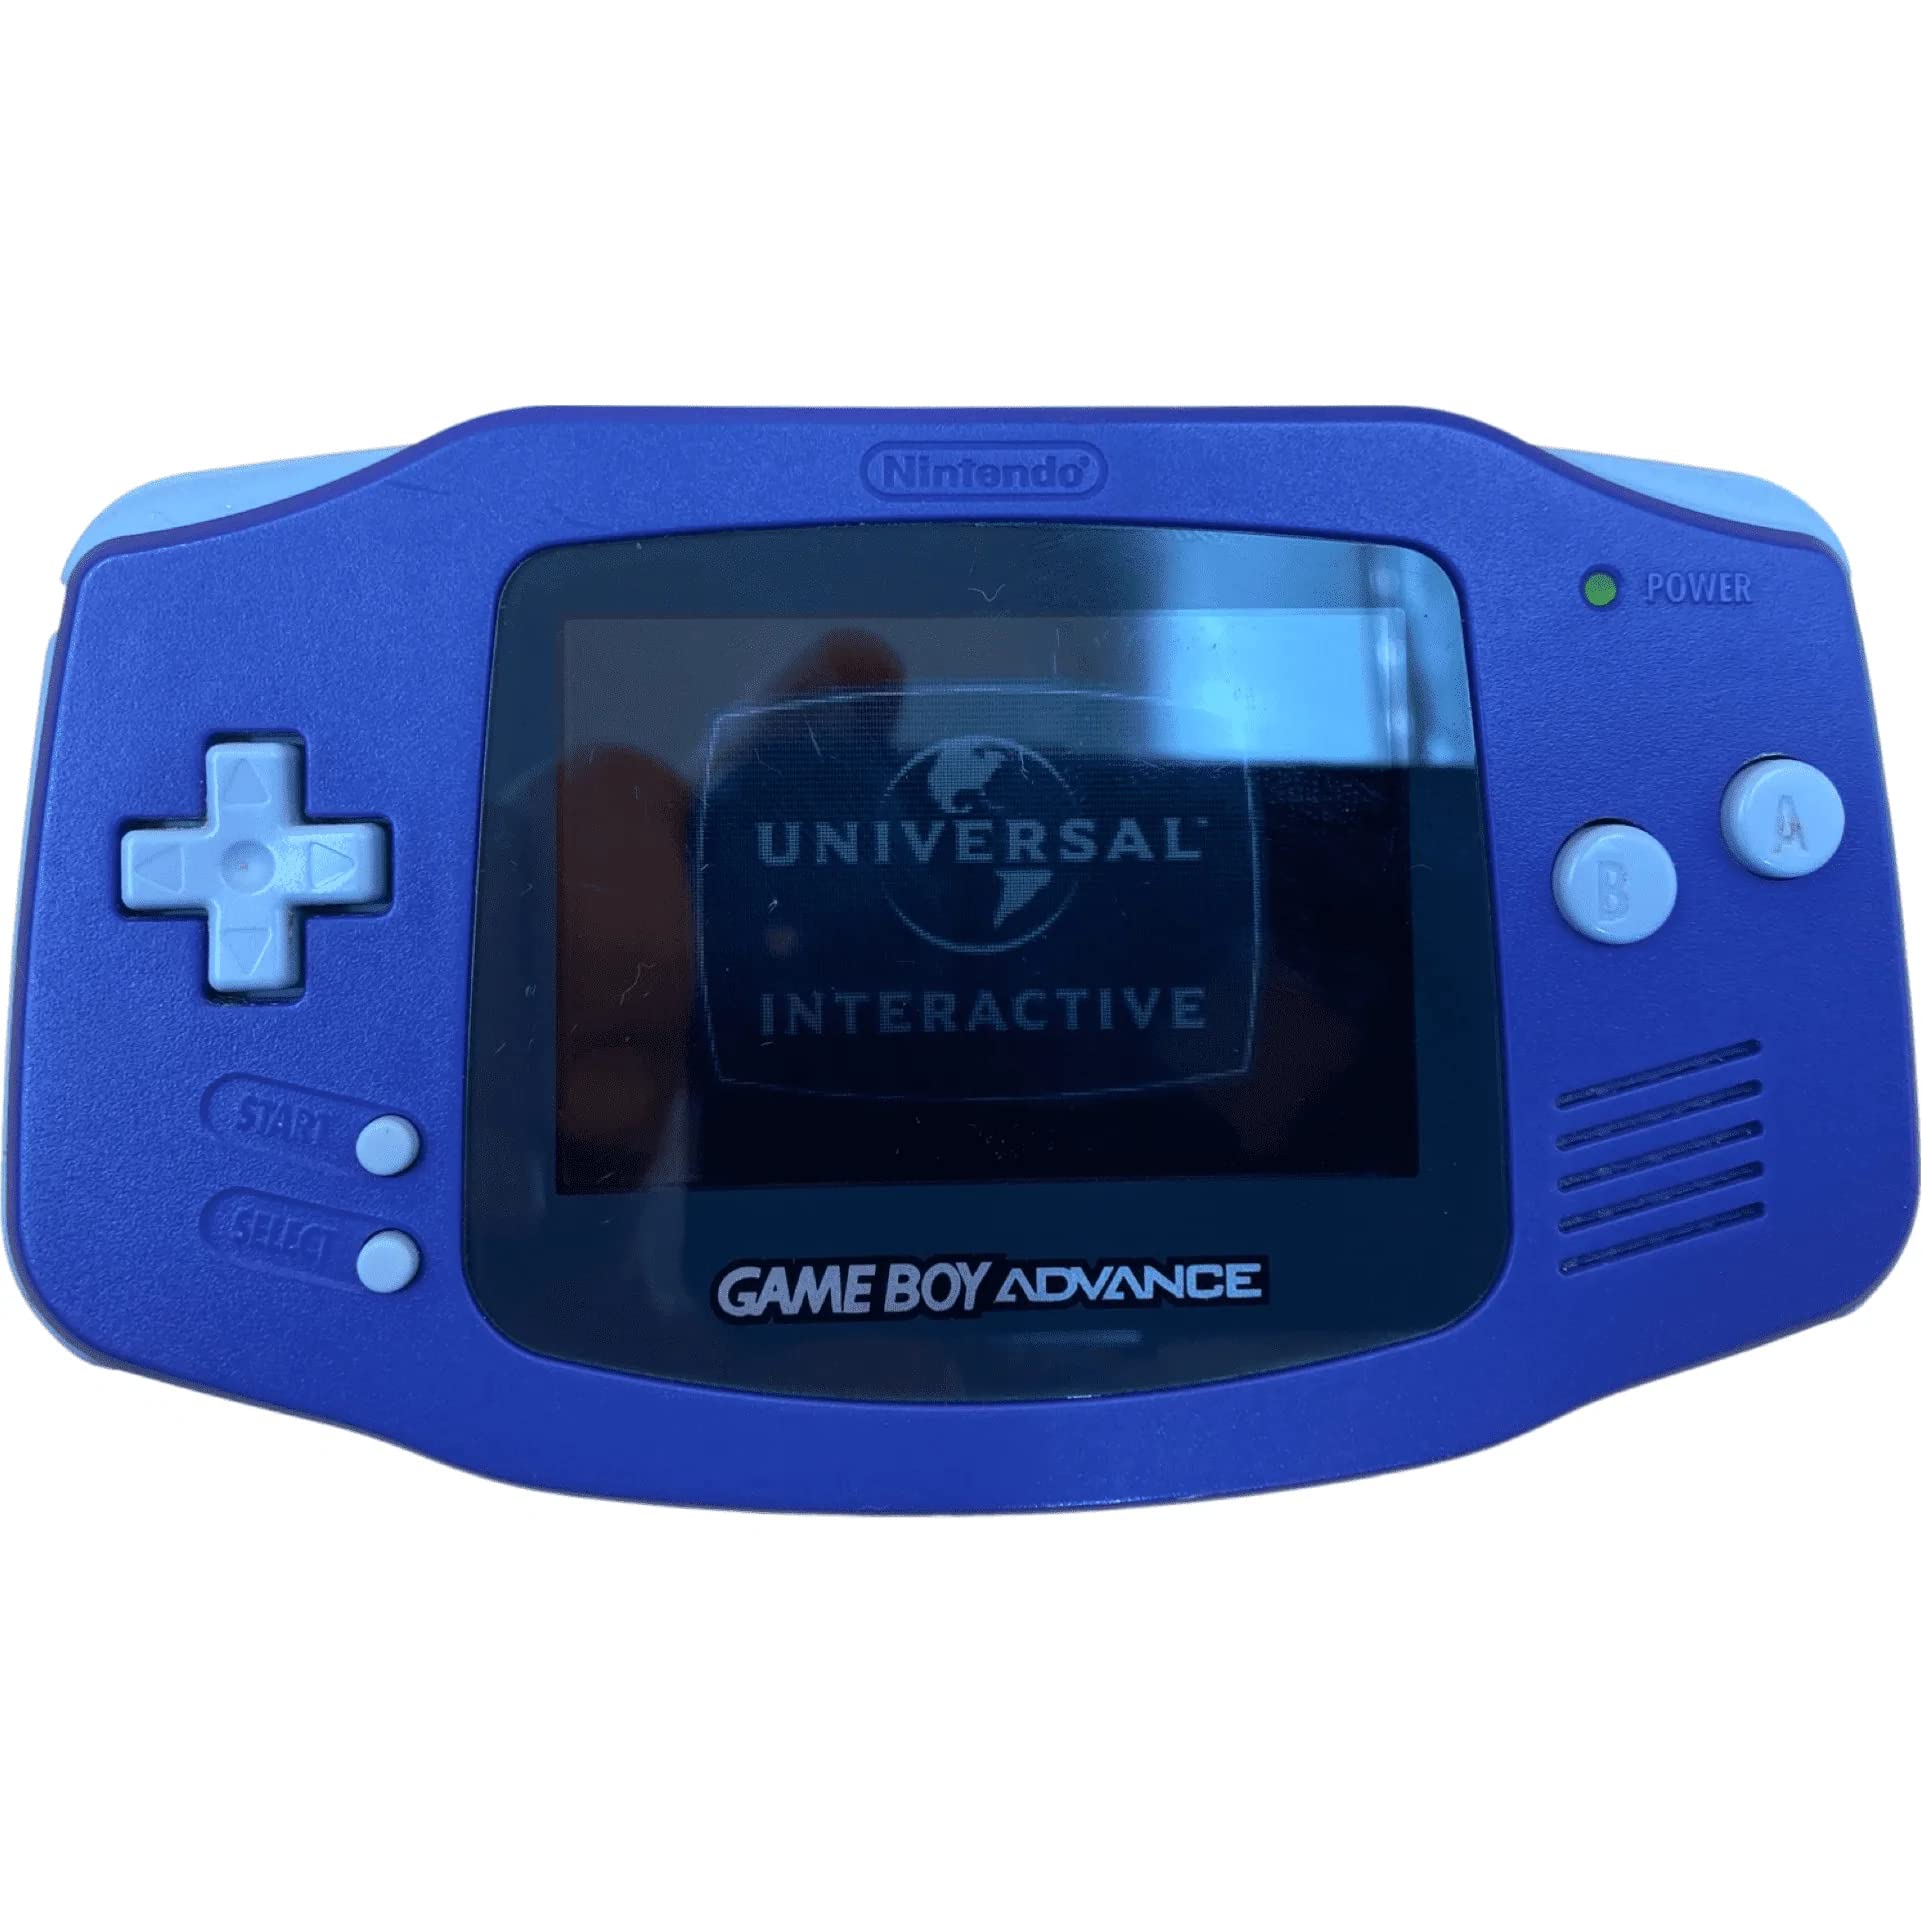 gameboy advance release price